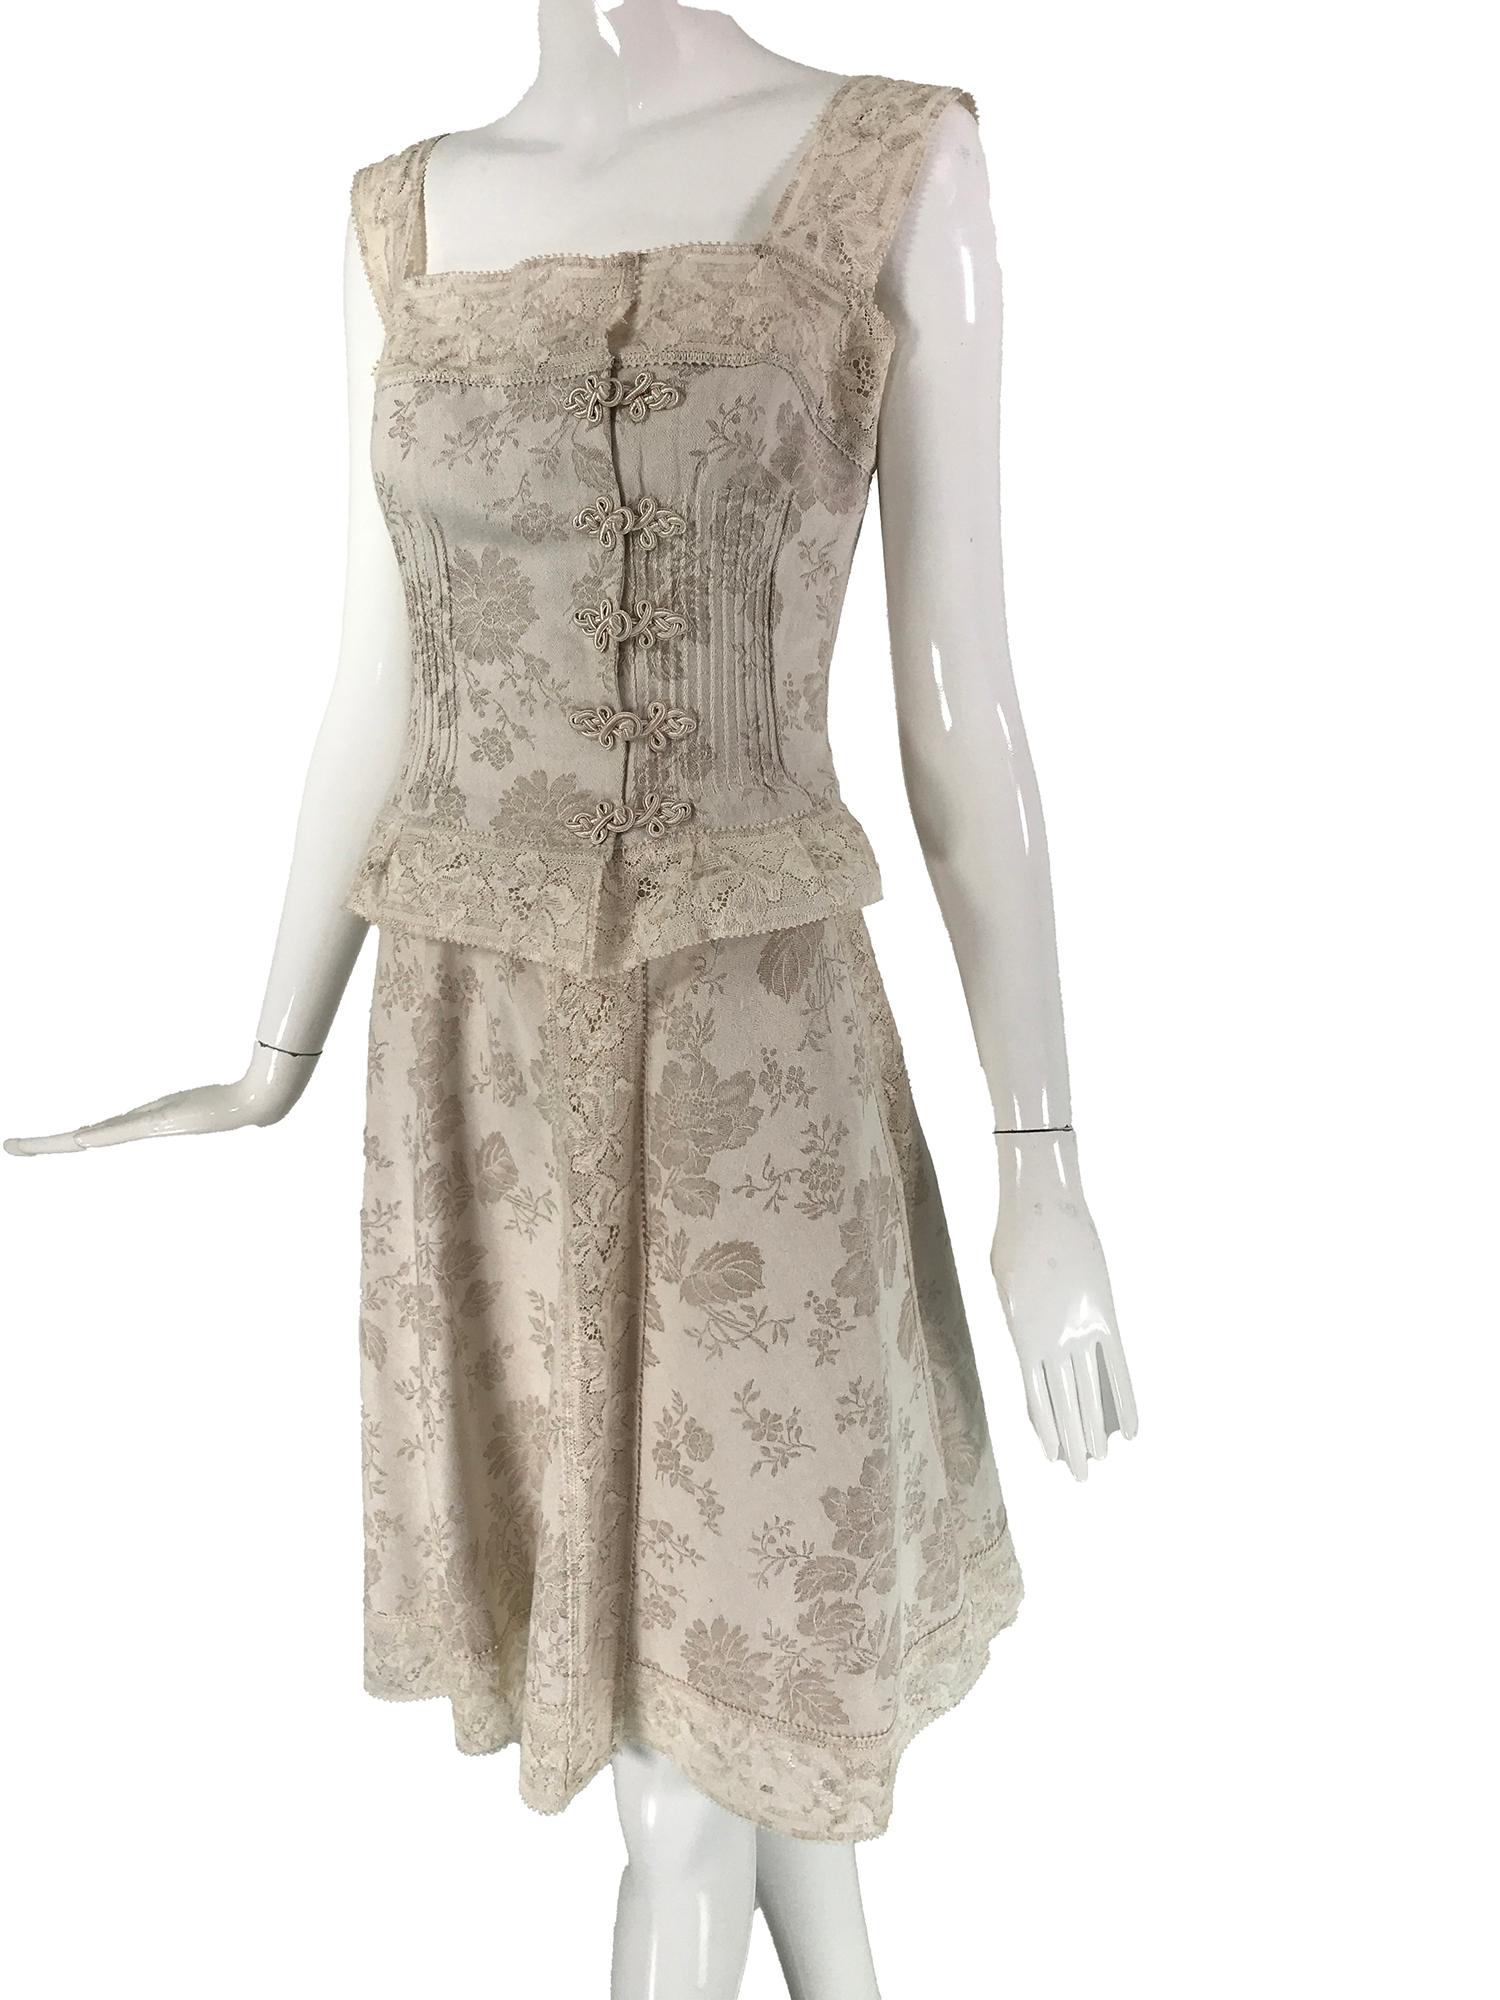 Valentino Boutique Ivory Floral Damask Linen & Lace Camisole Top & Skirt 1980s 4